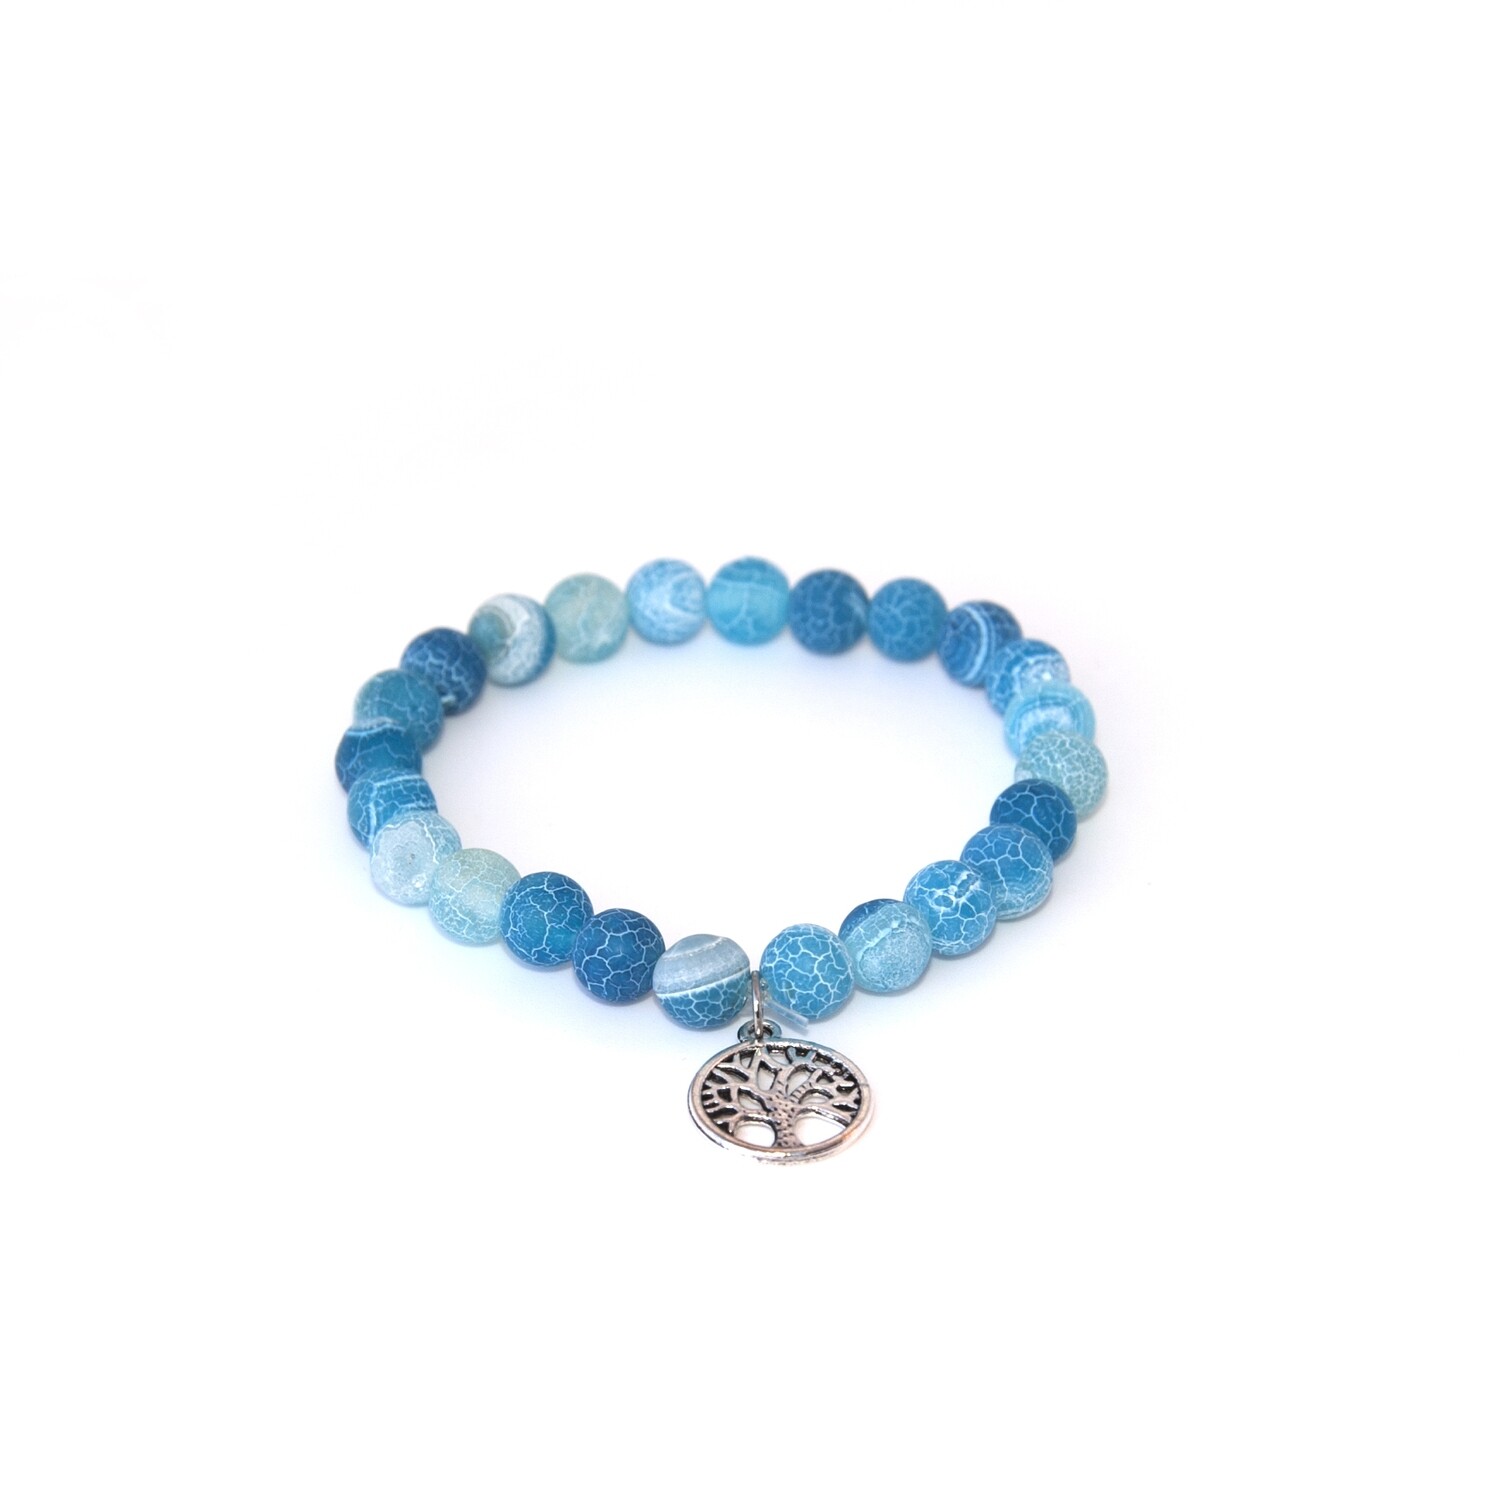 Light blue frosted agate bracelet with Tree of Life